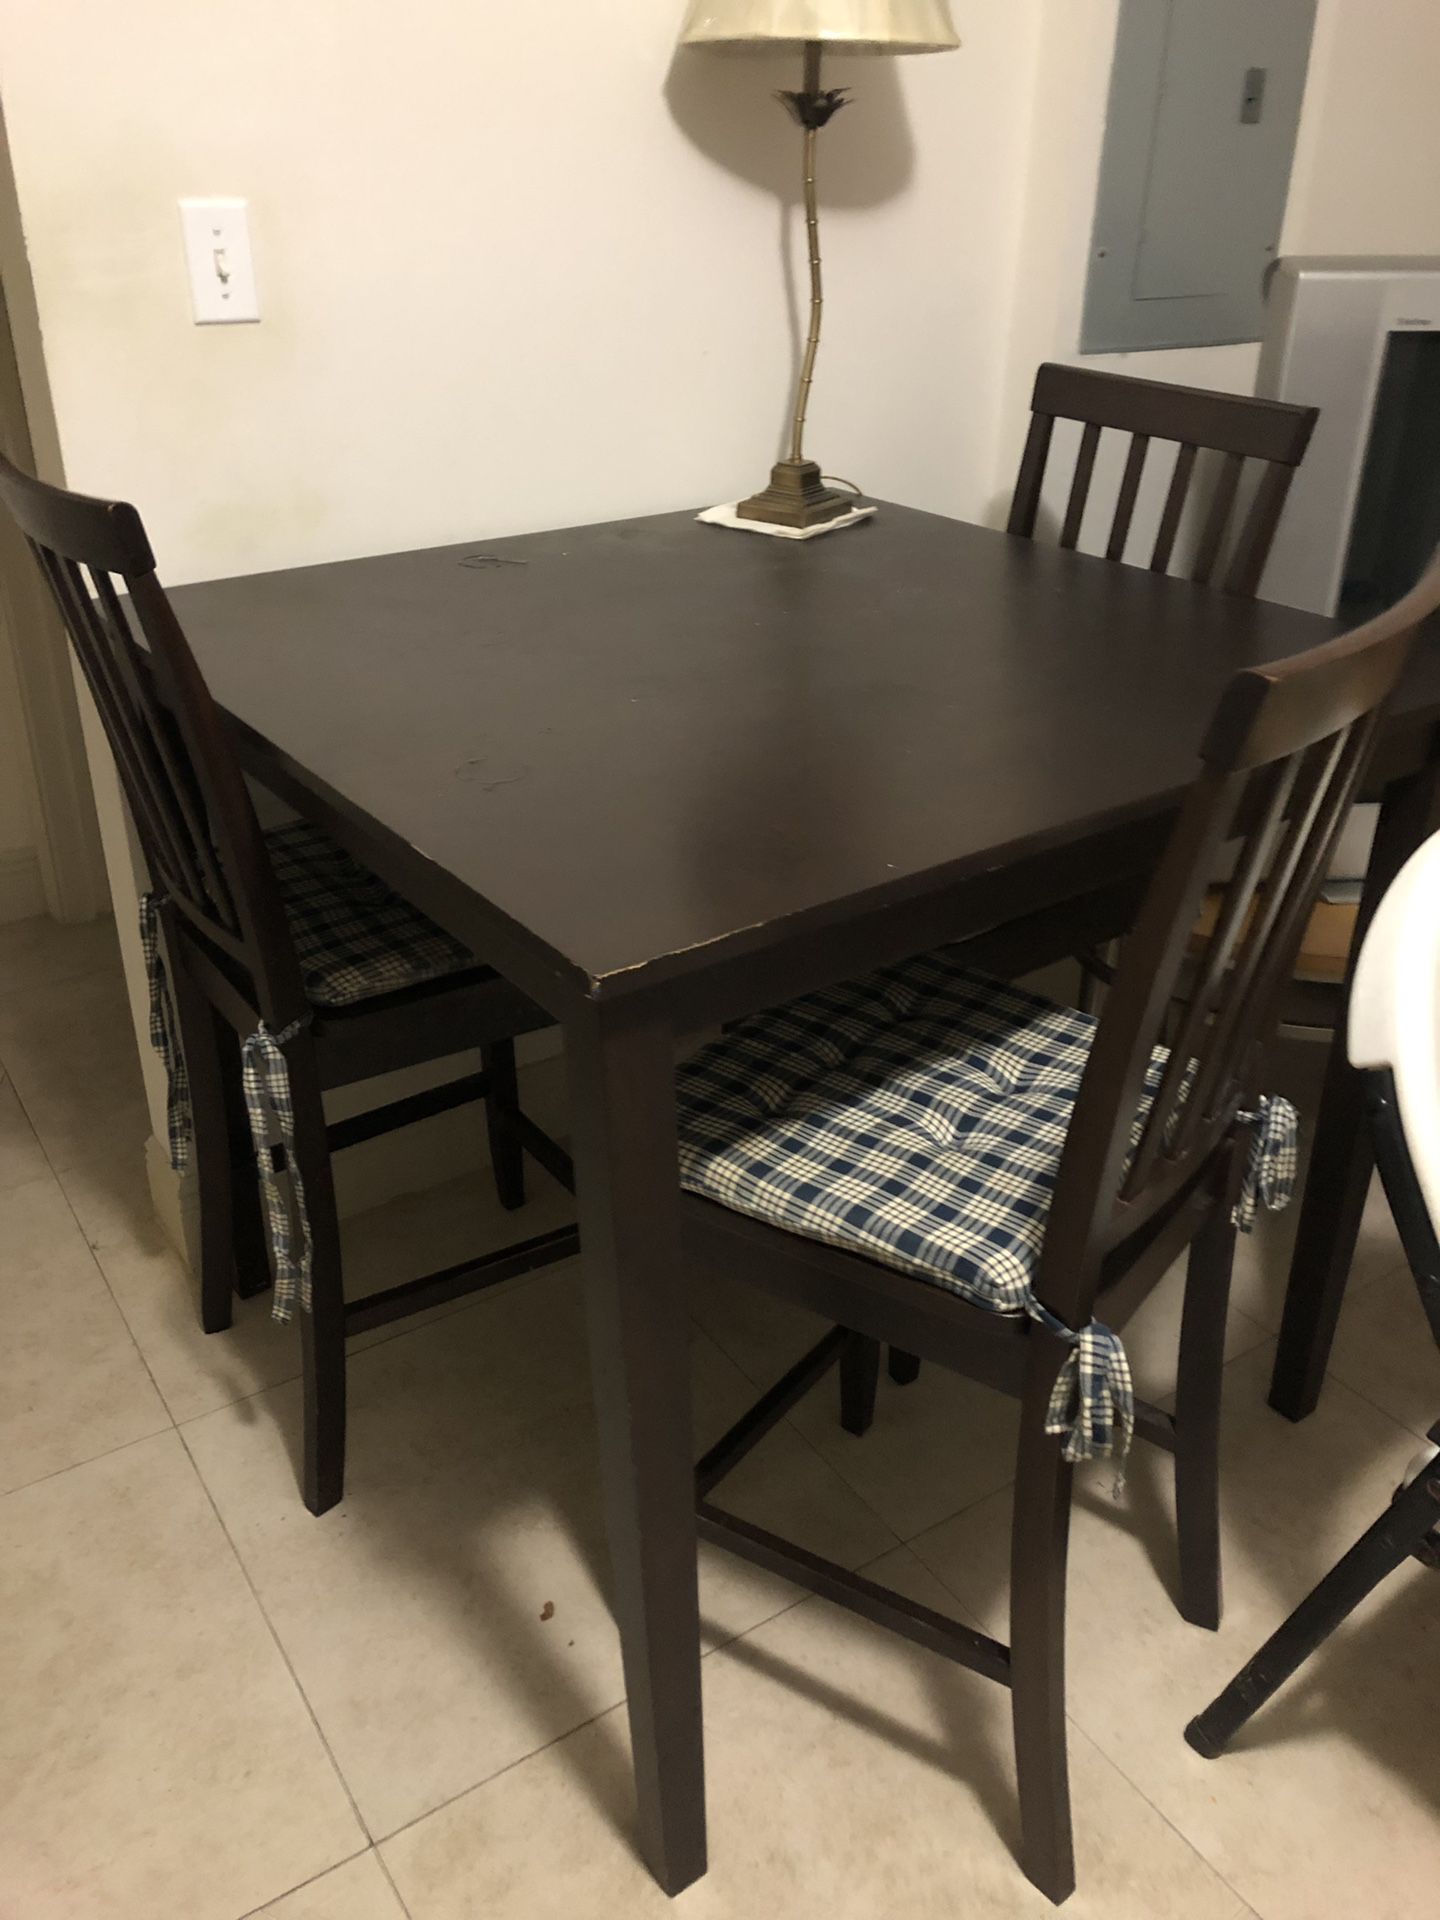 Counter hight table with chairs. Moving must go!!